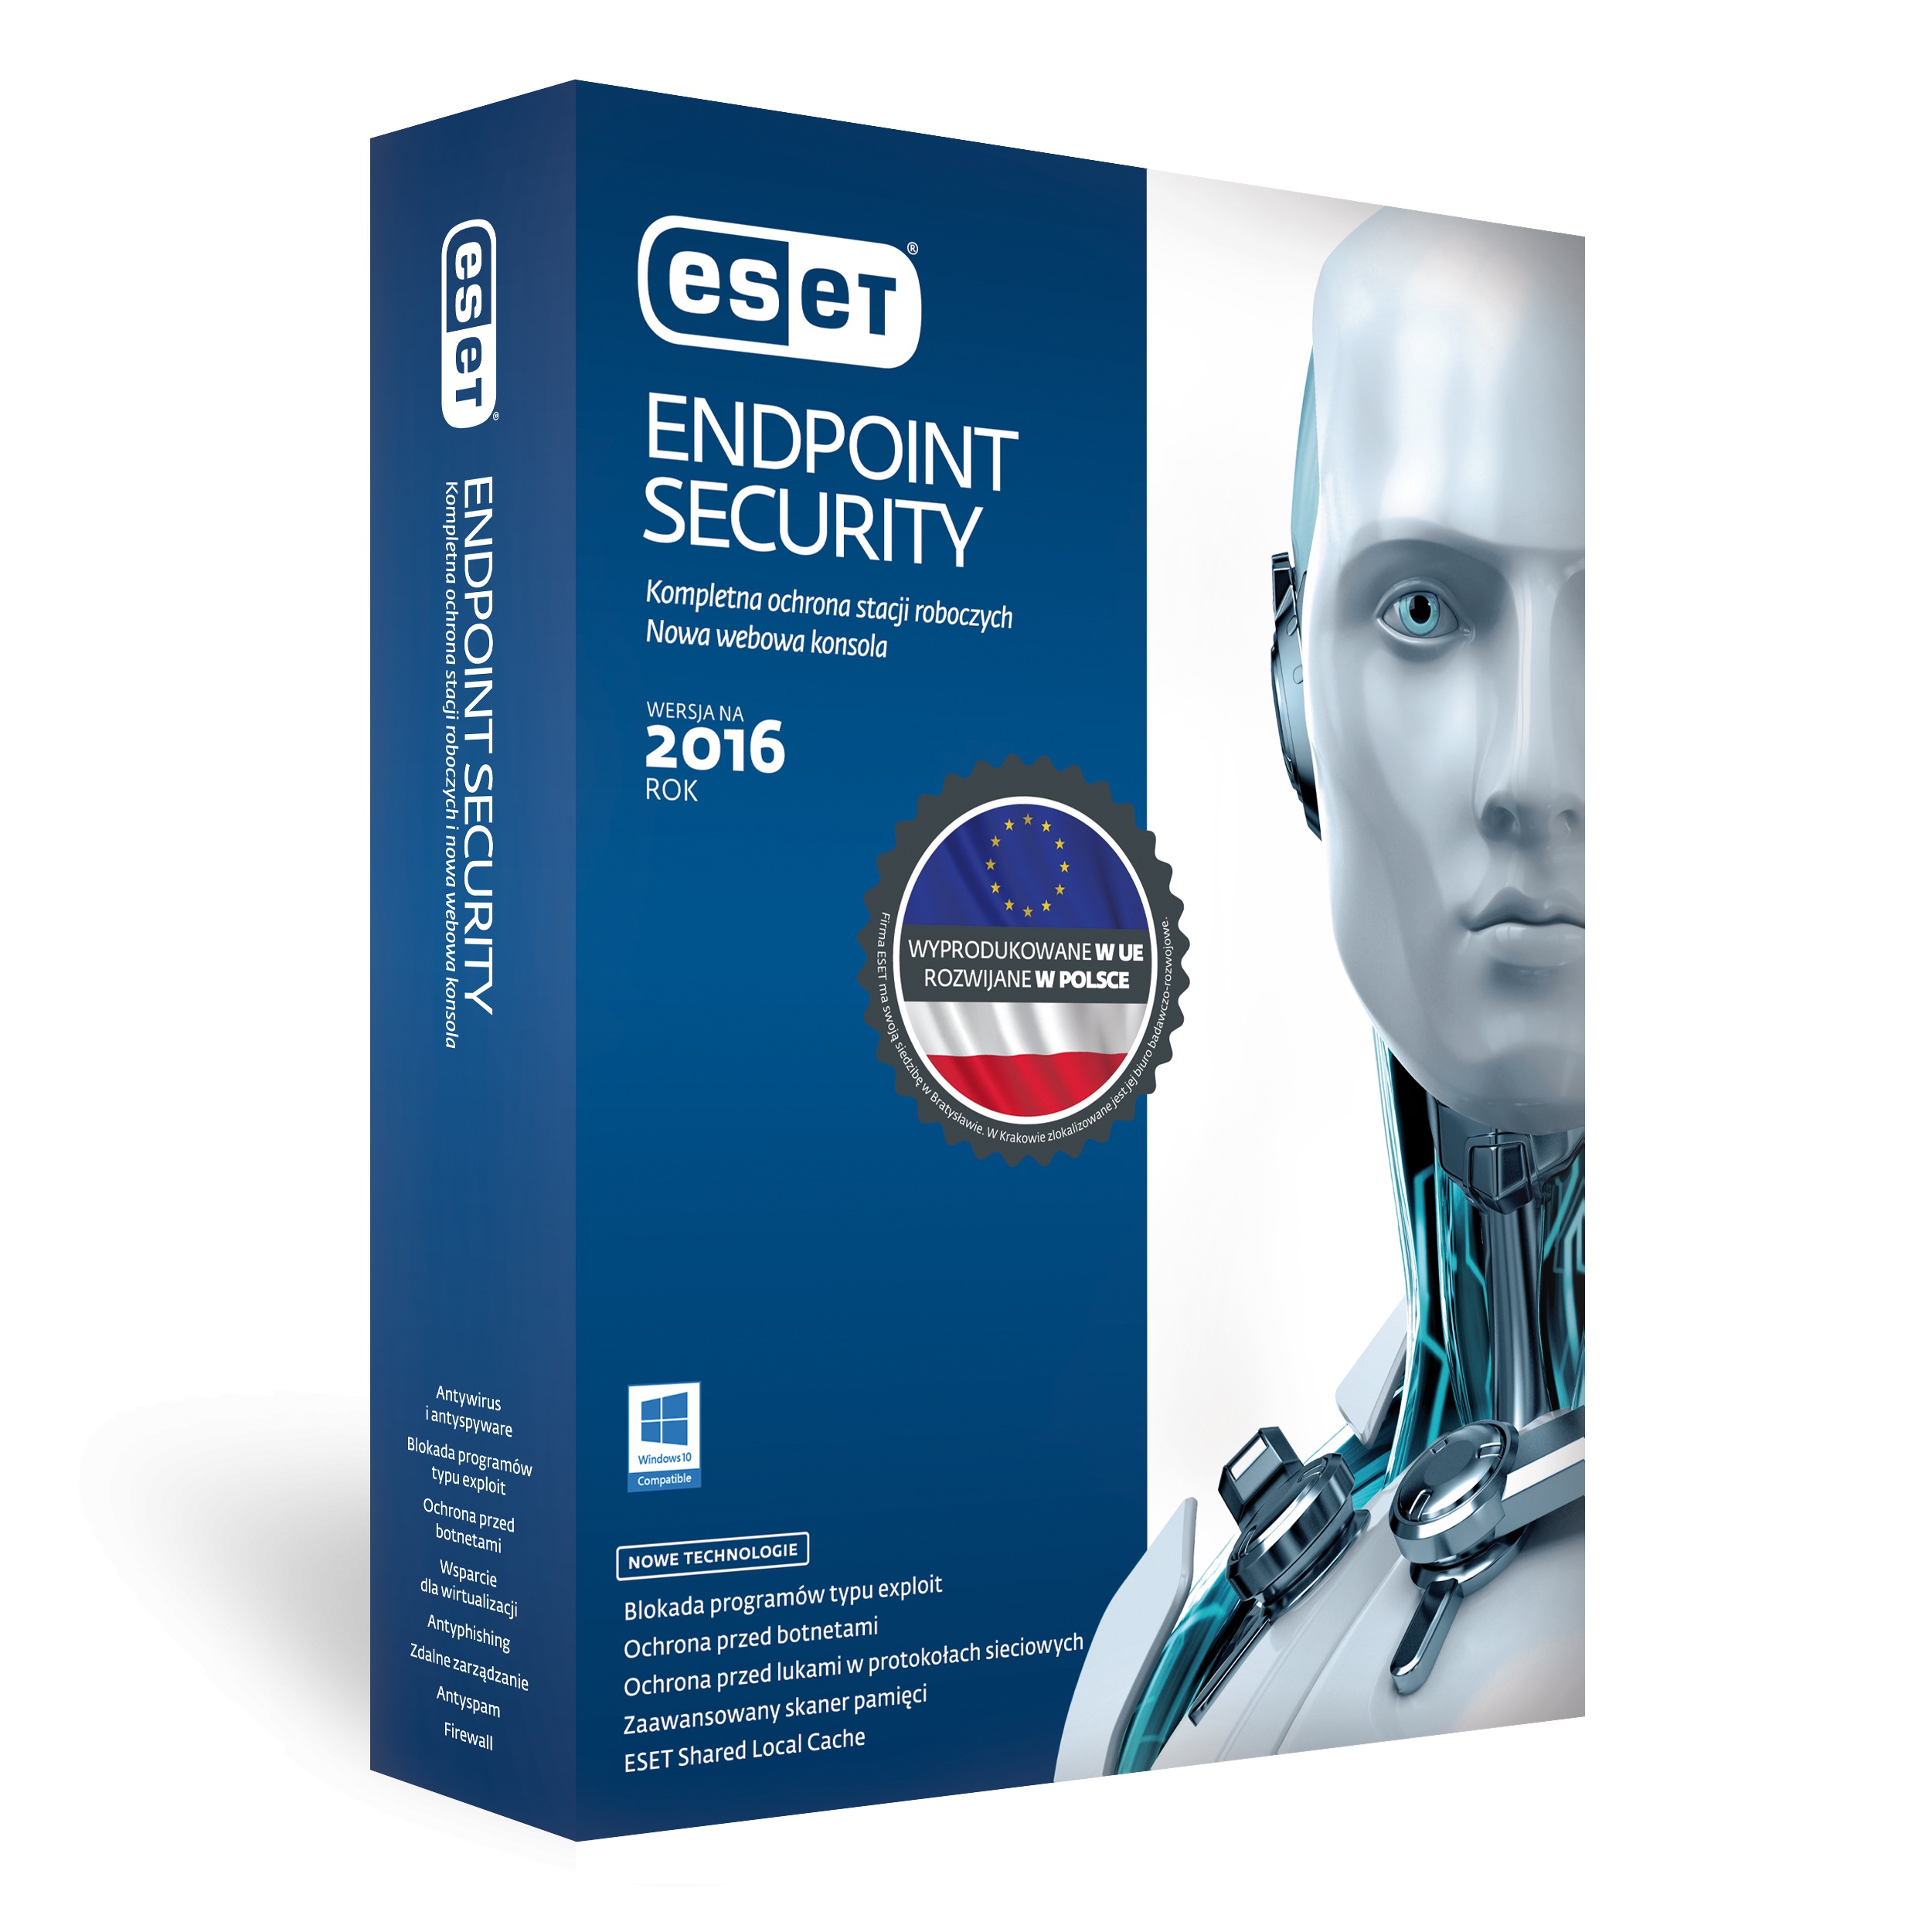 ESET Endpoint Security 10.1.2058.0 instal the new version for iphone